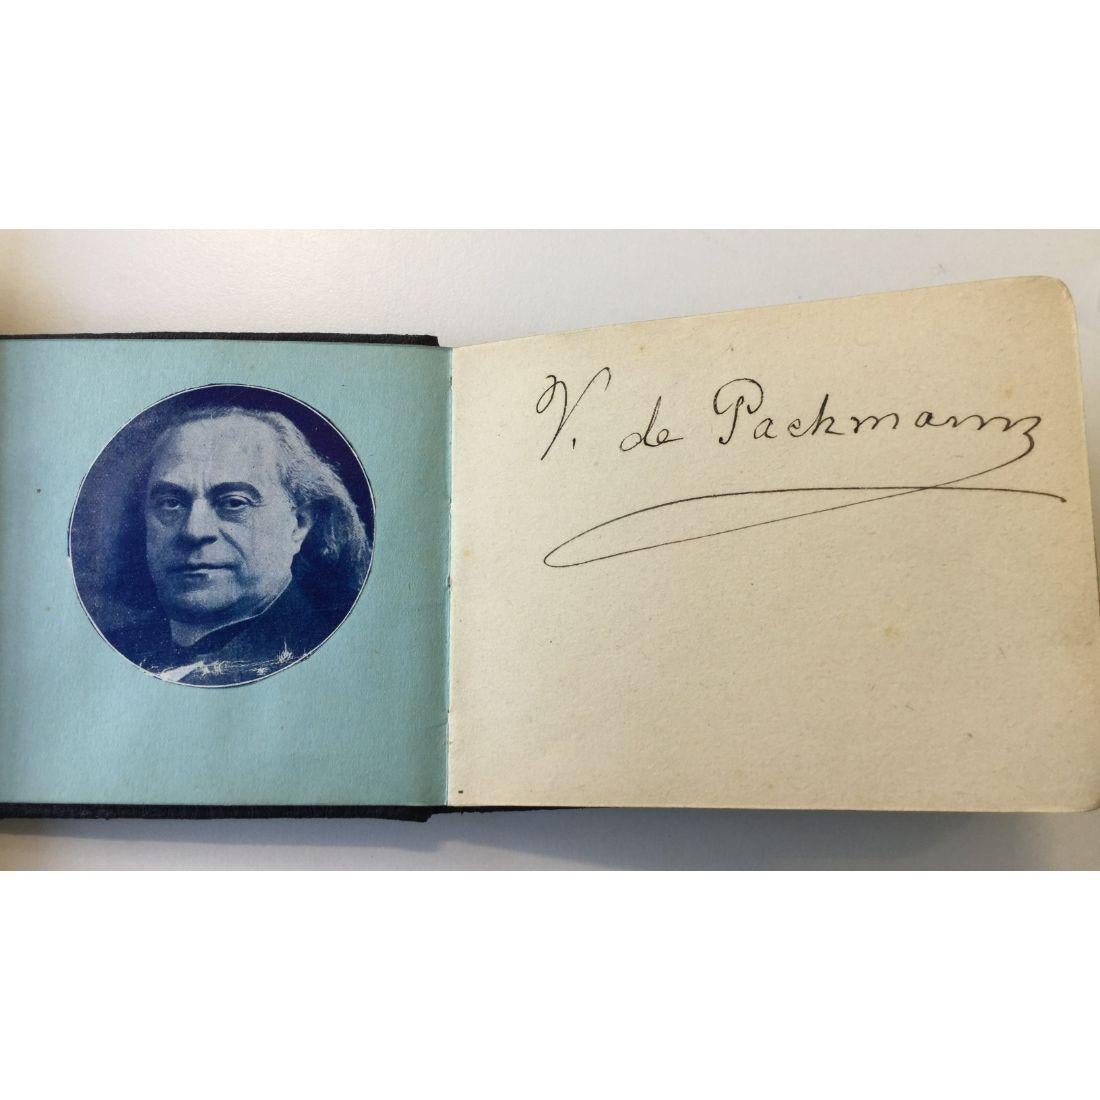 A wonderful autograph book containing 31 signatures from classical musicians, singers, conductors and composers 
Compiled in the 1920s. 

Names include:

Pianist V. de Pachmann
Soprano Stella Power
Composer Percy Kahn
Opera singer Olga Haley
Pianist